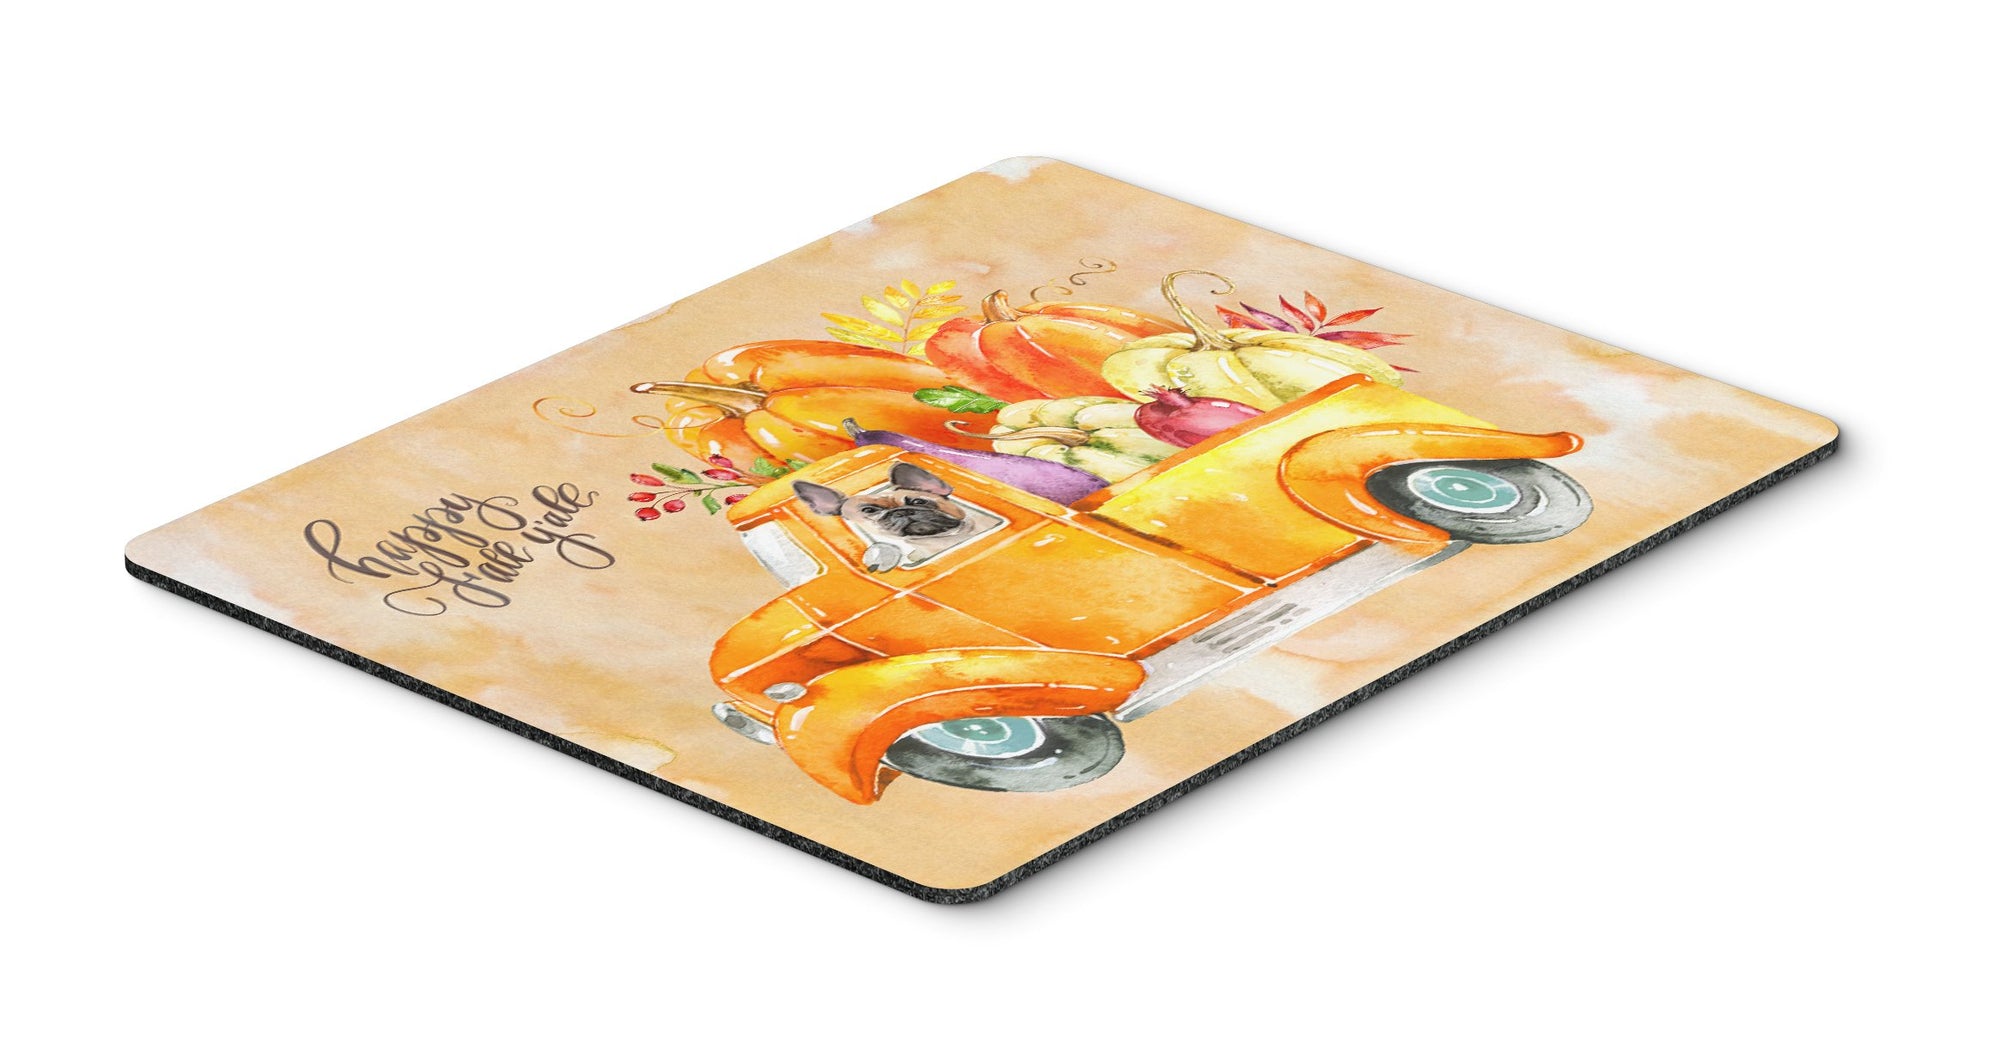 Fall Harvest Fawn French Bulldog Mouse Pad, Hot Pad or Trivet CK2666MP by Caroline's Treasures